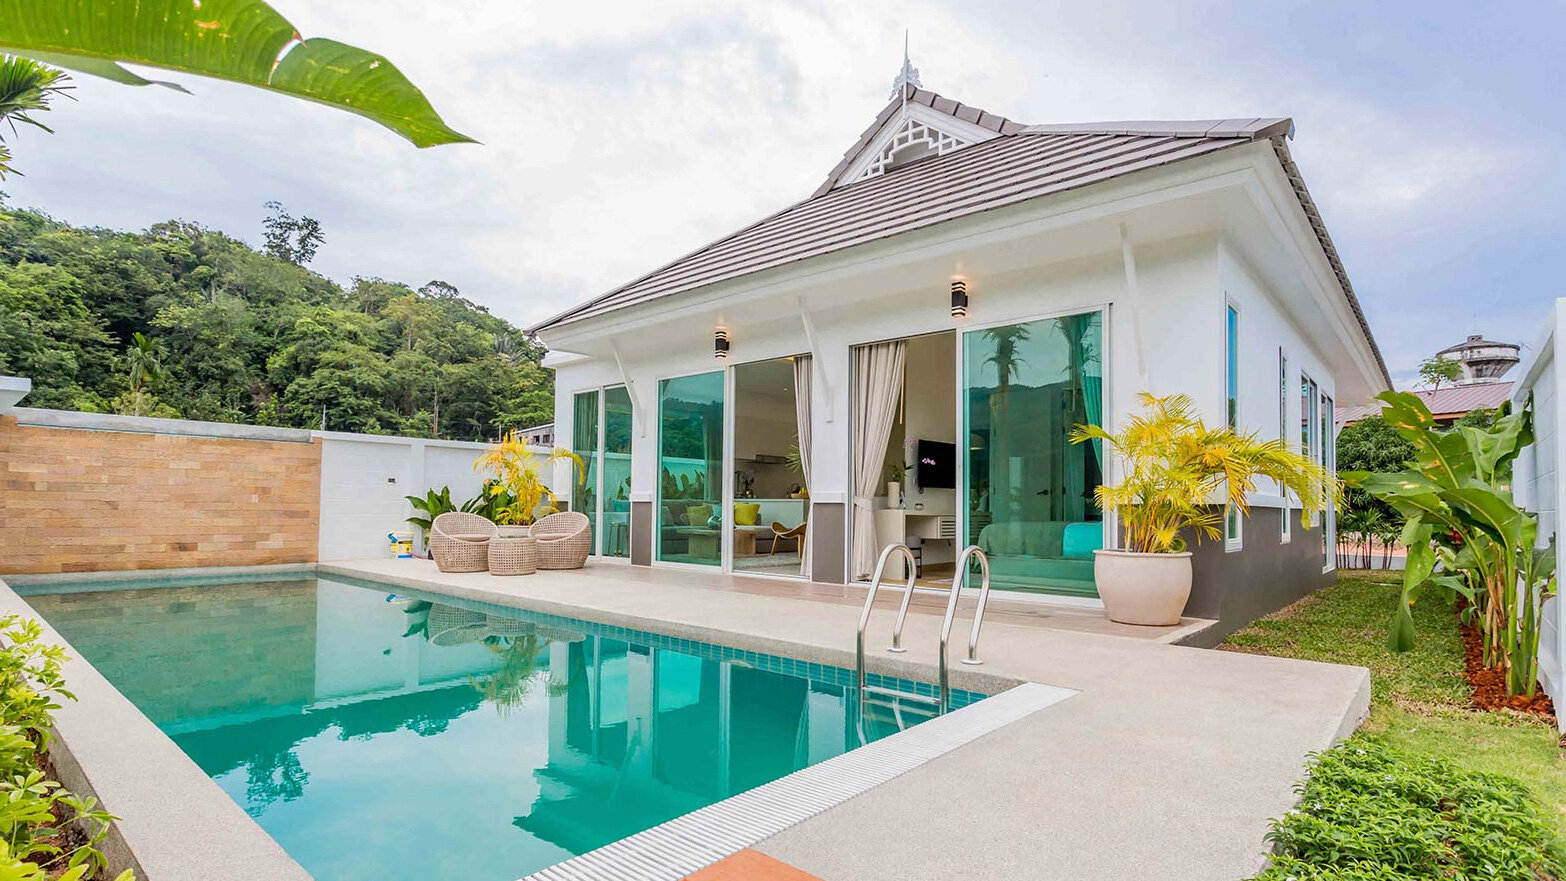 Modern Houses in Thailand: A Look Inside